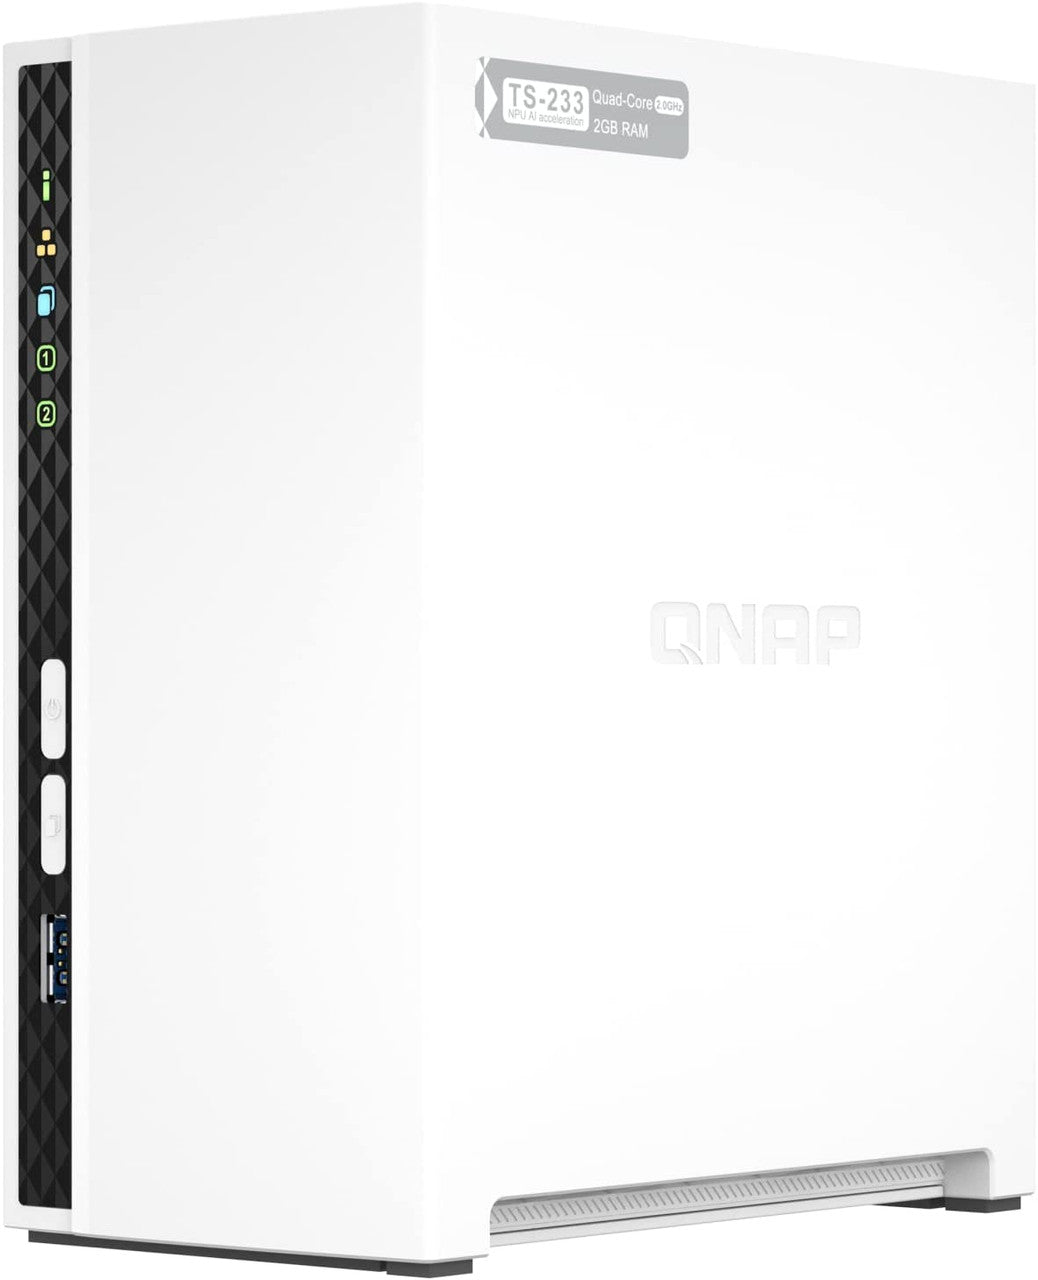 QNAP TS-233 2-Bay Desktop NAS with a 24TB (2 x 12TB) of Western Digital Red Plus Drives Fully Assembled and Tested